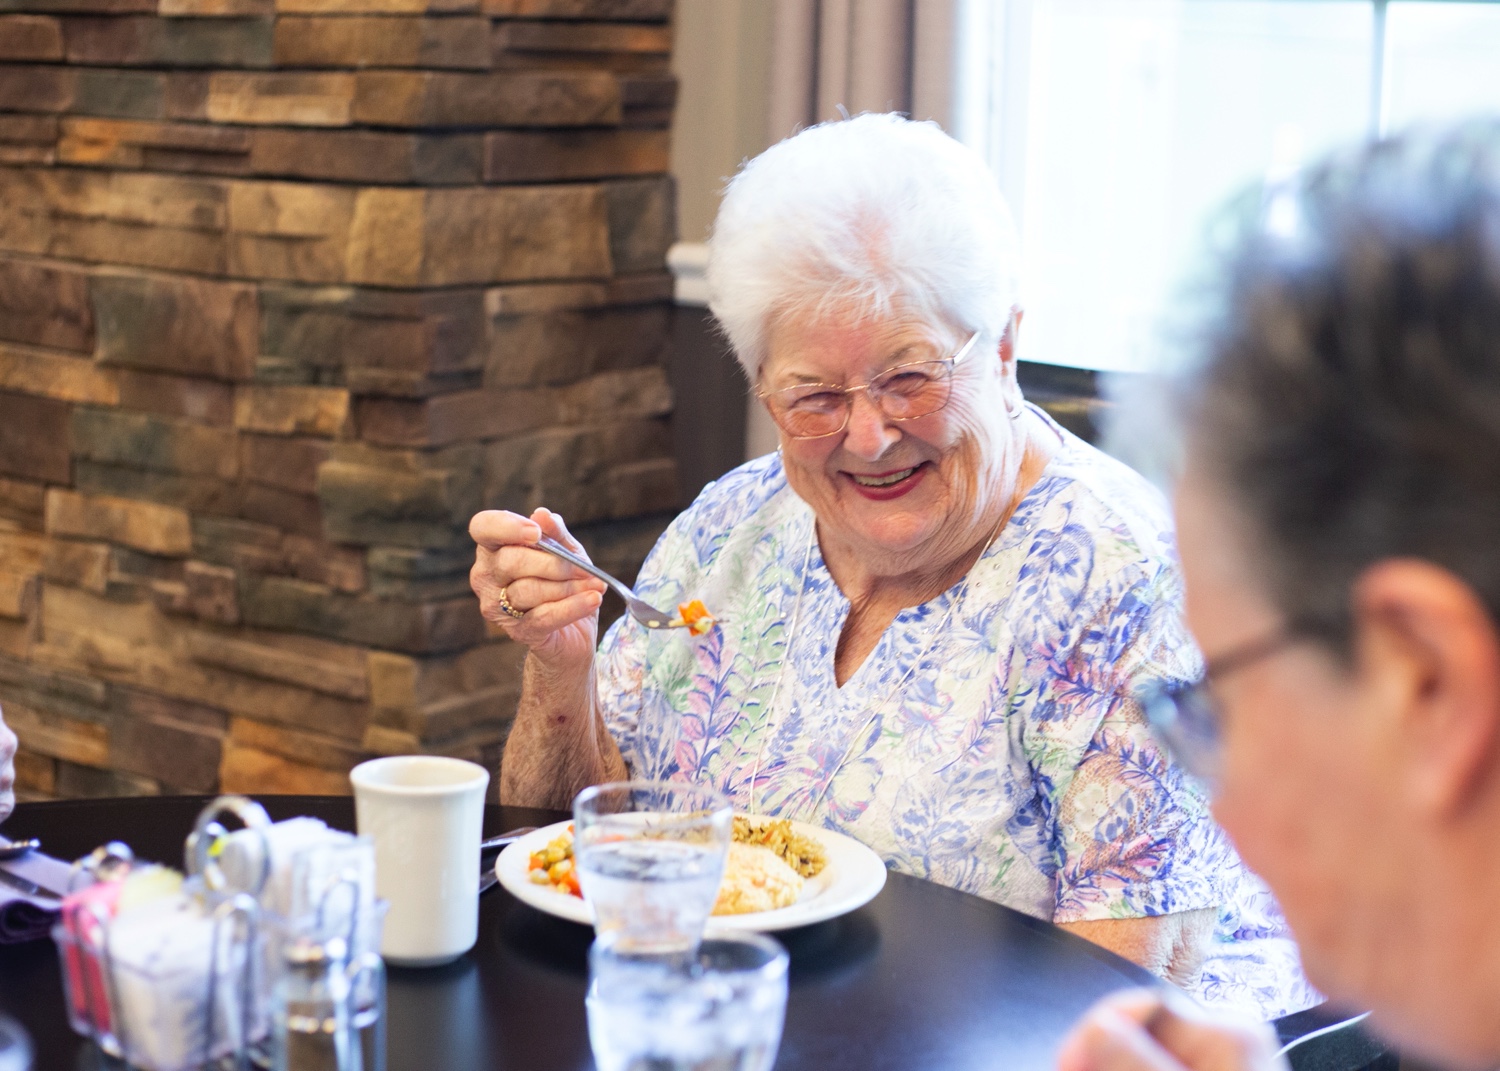 Residents smiling and enjoying breakfast together